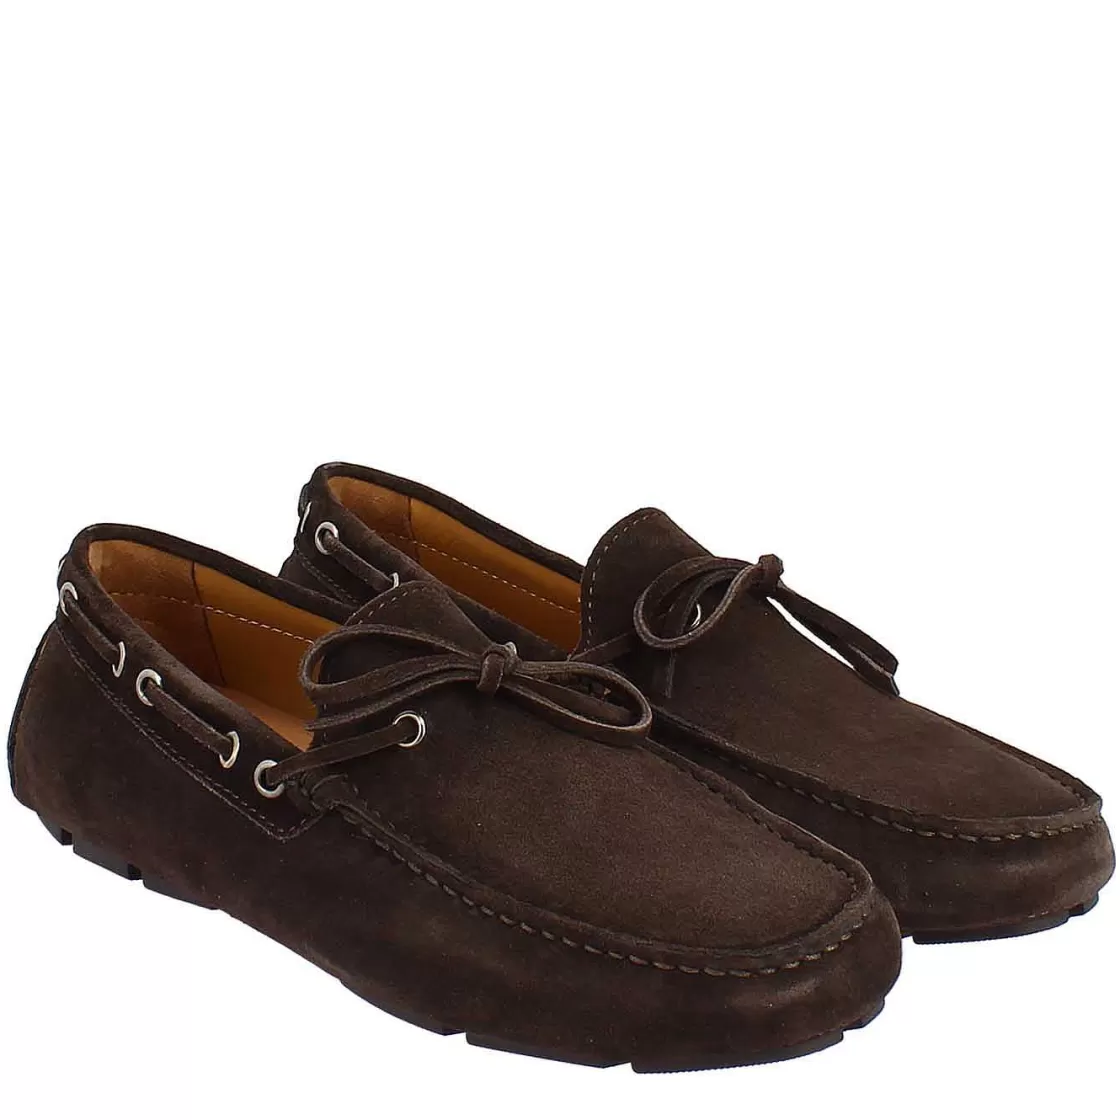 Leonardo Handmade Men'S Carshoe Loafers In Brown Suede Leather. Fashion